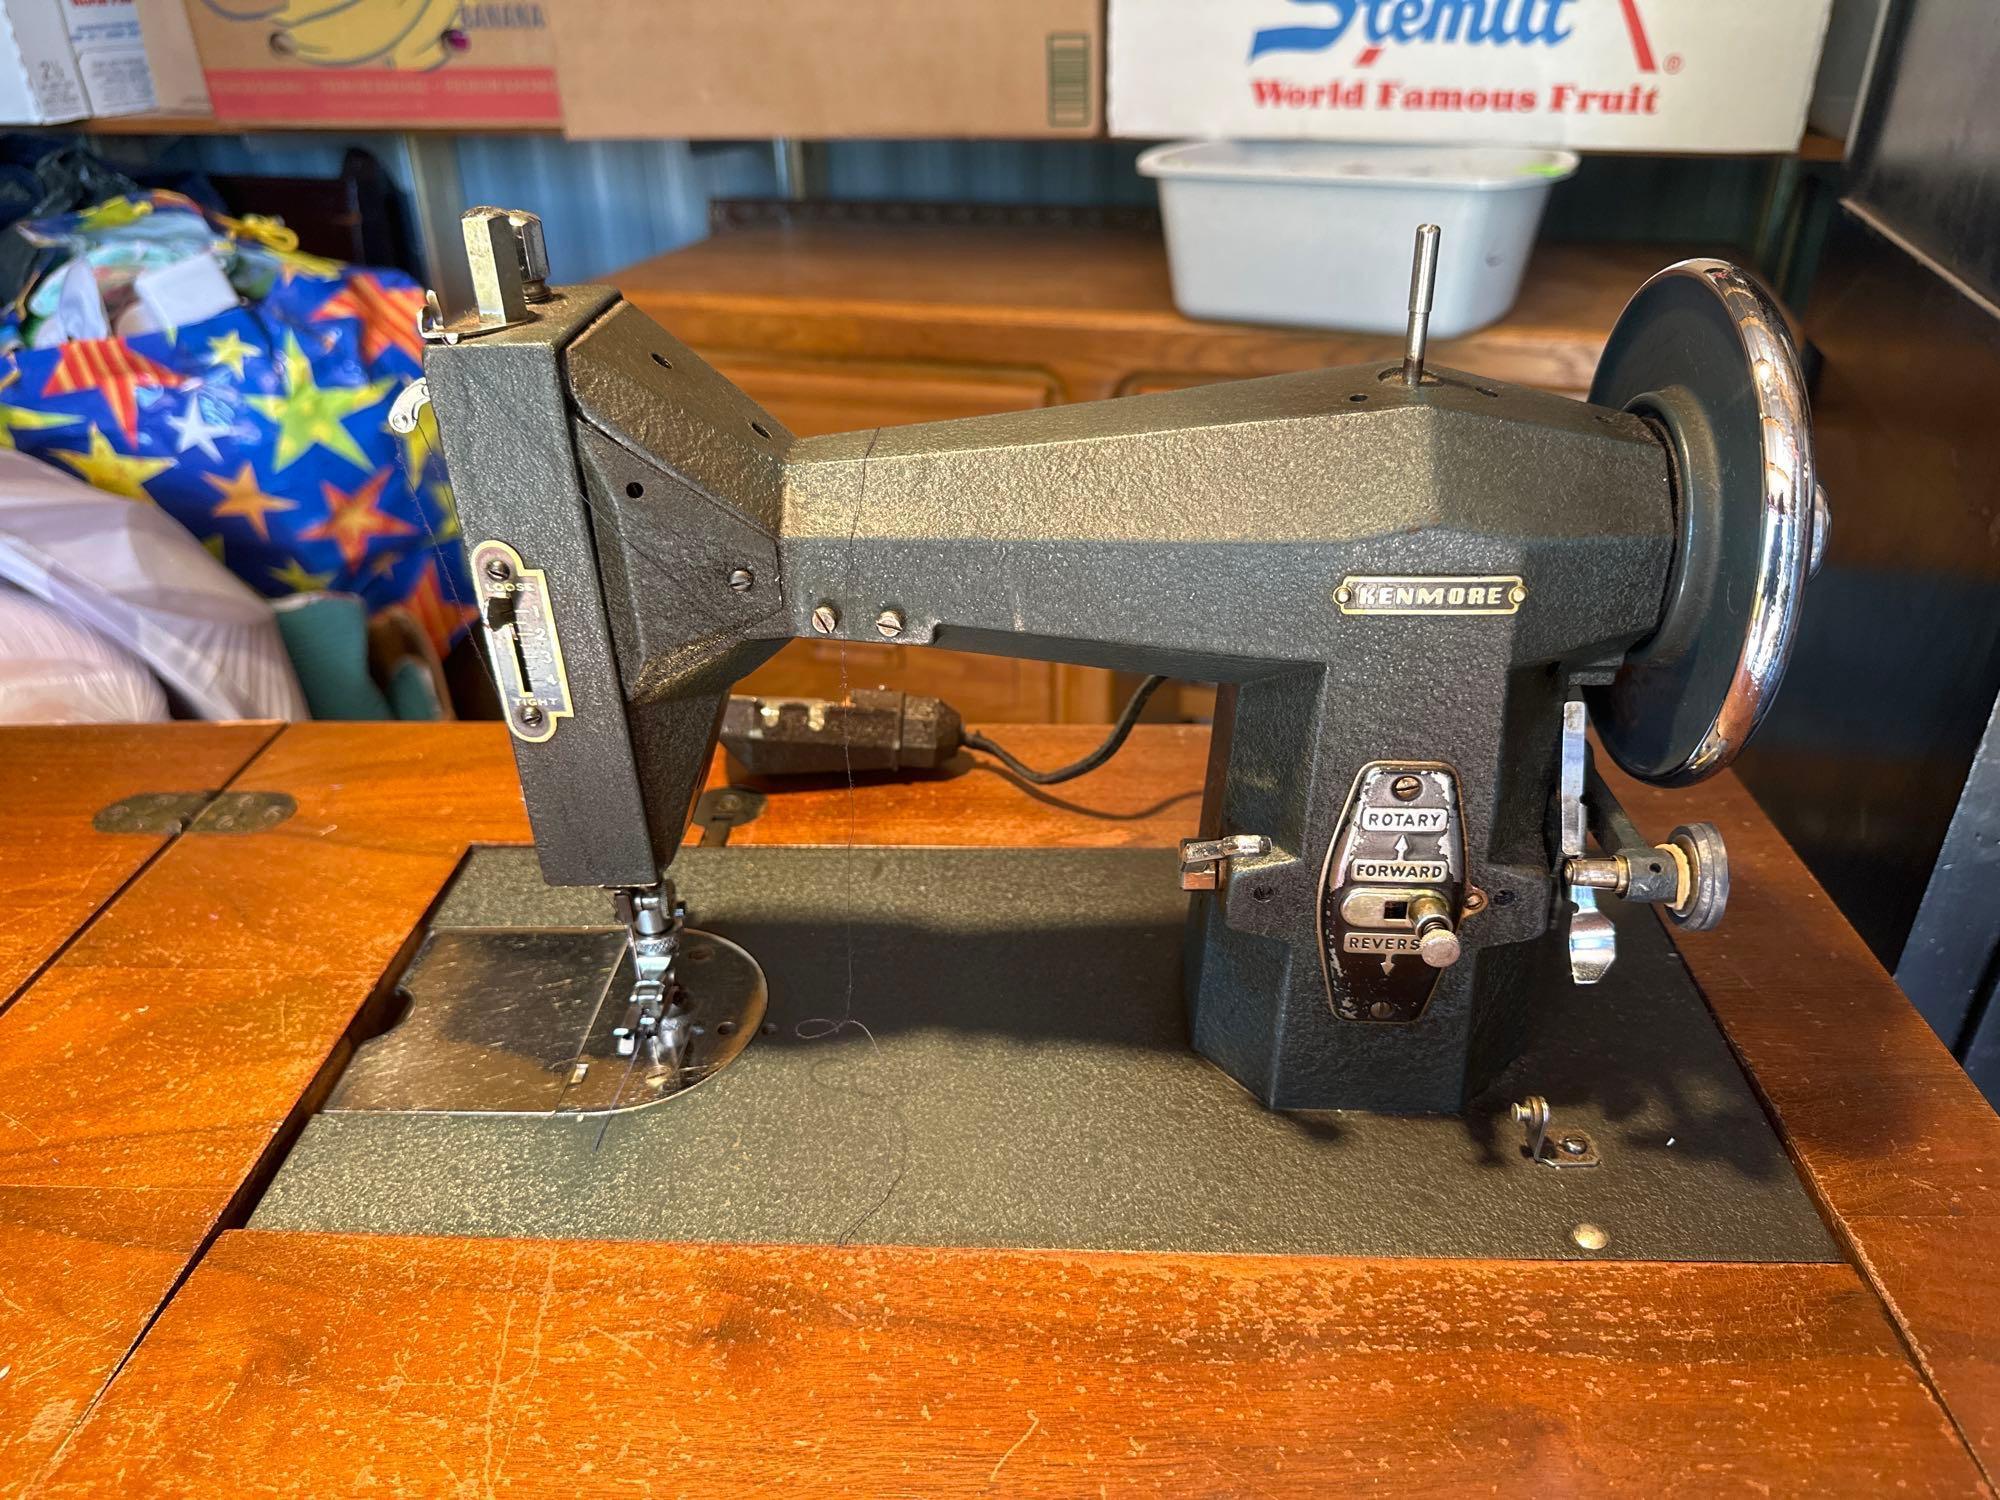 Vintage Kenmore Electric Sewing Machine With Accessories